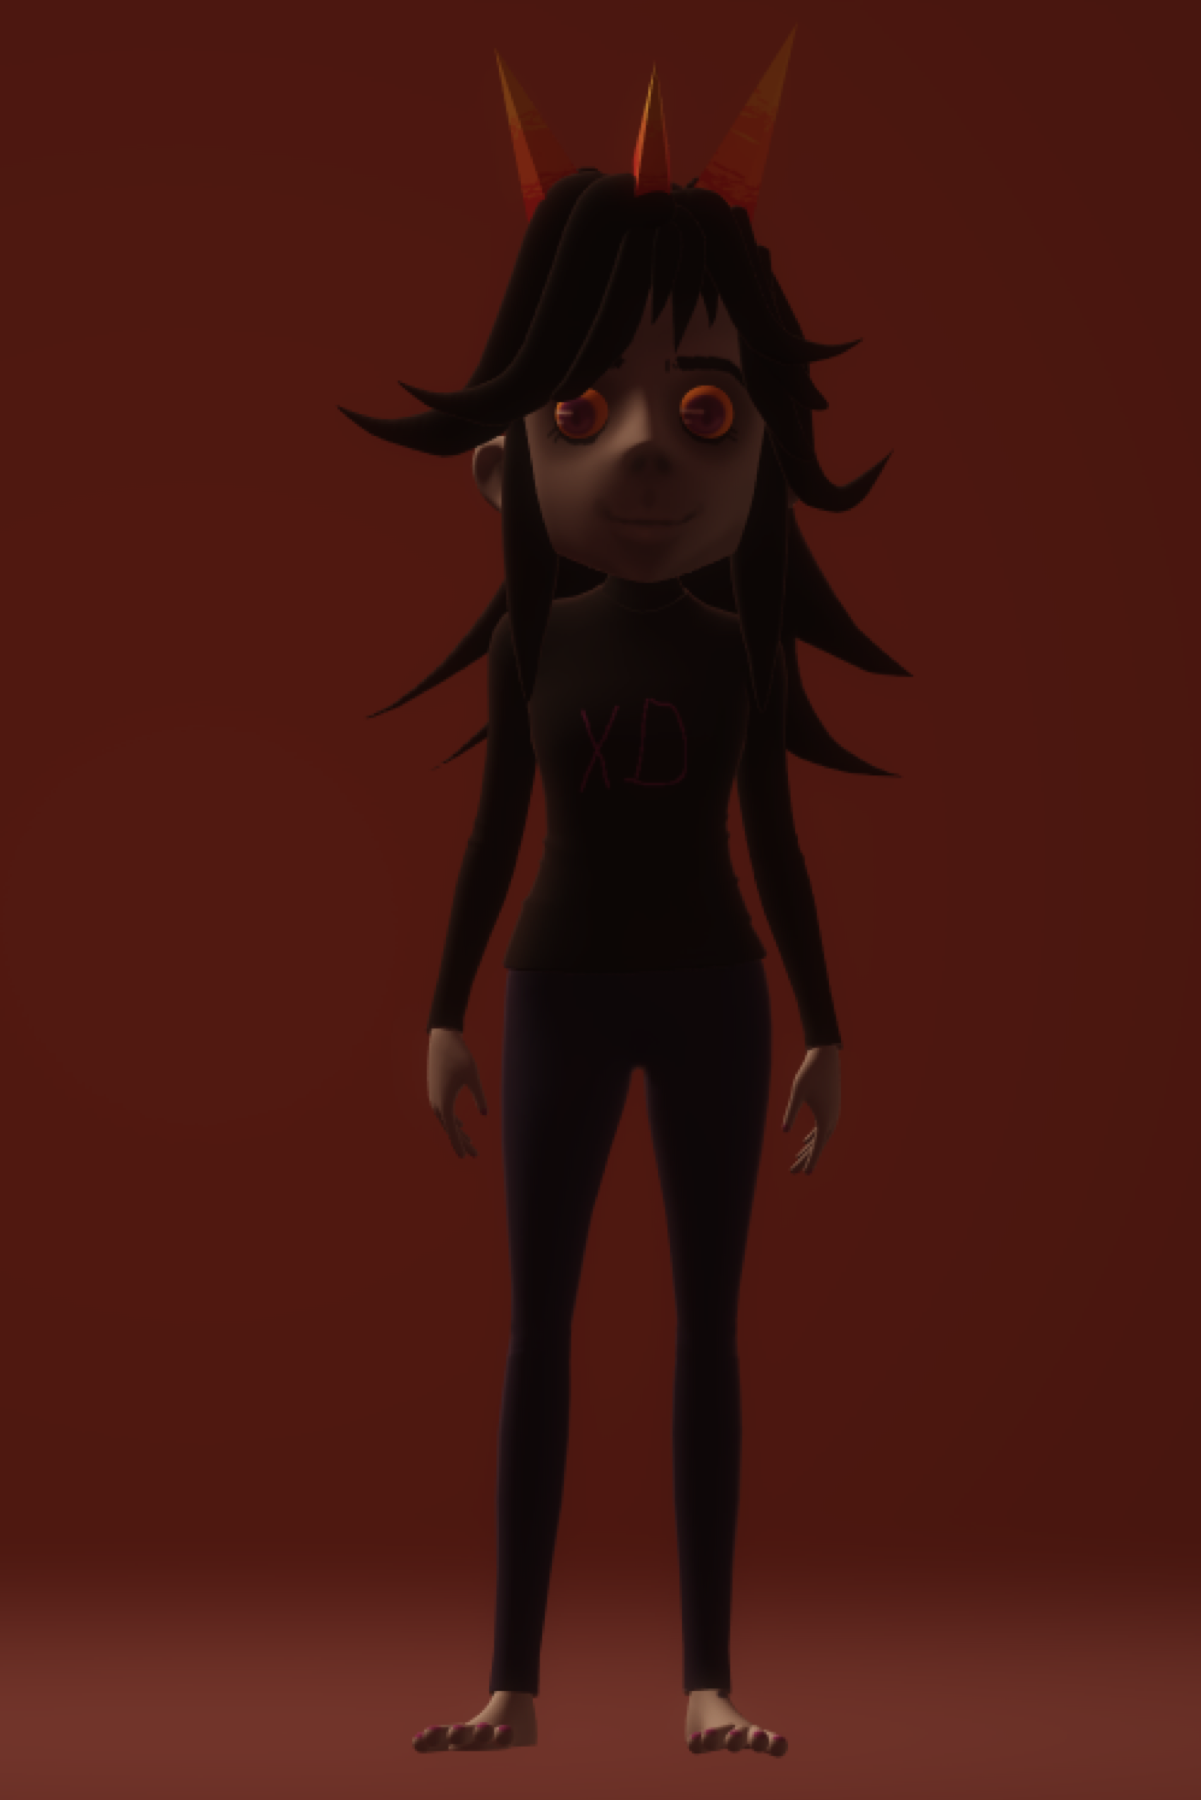 Remember when I used to make a lot of evil paint 3D art 